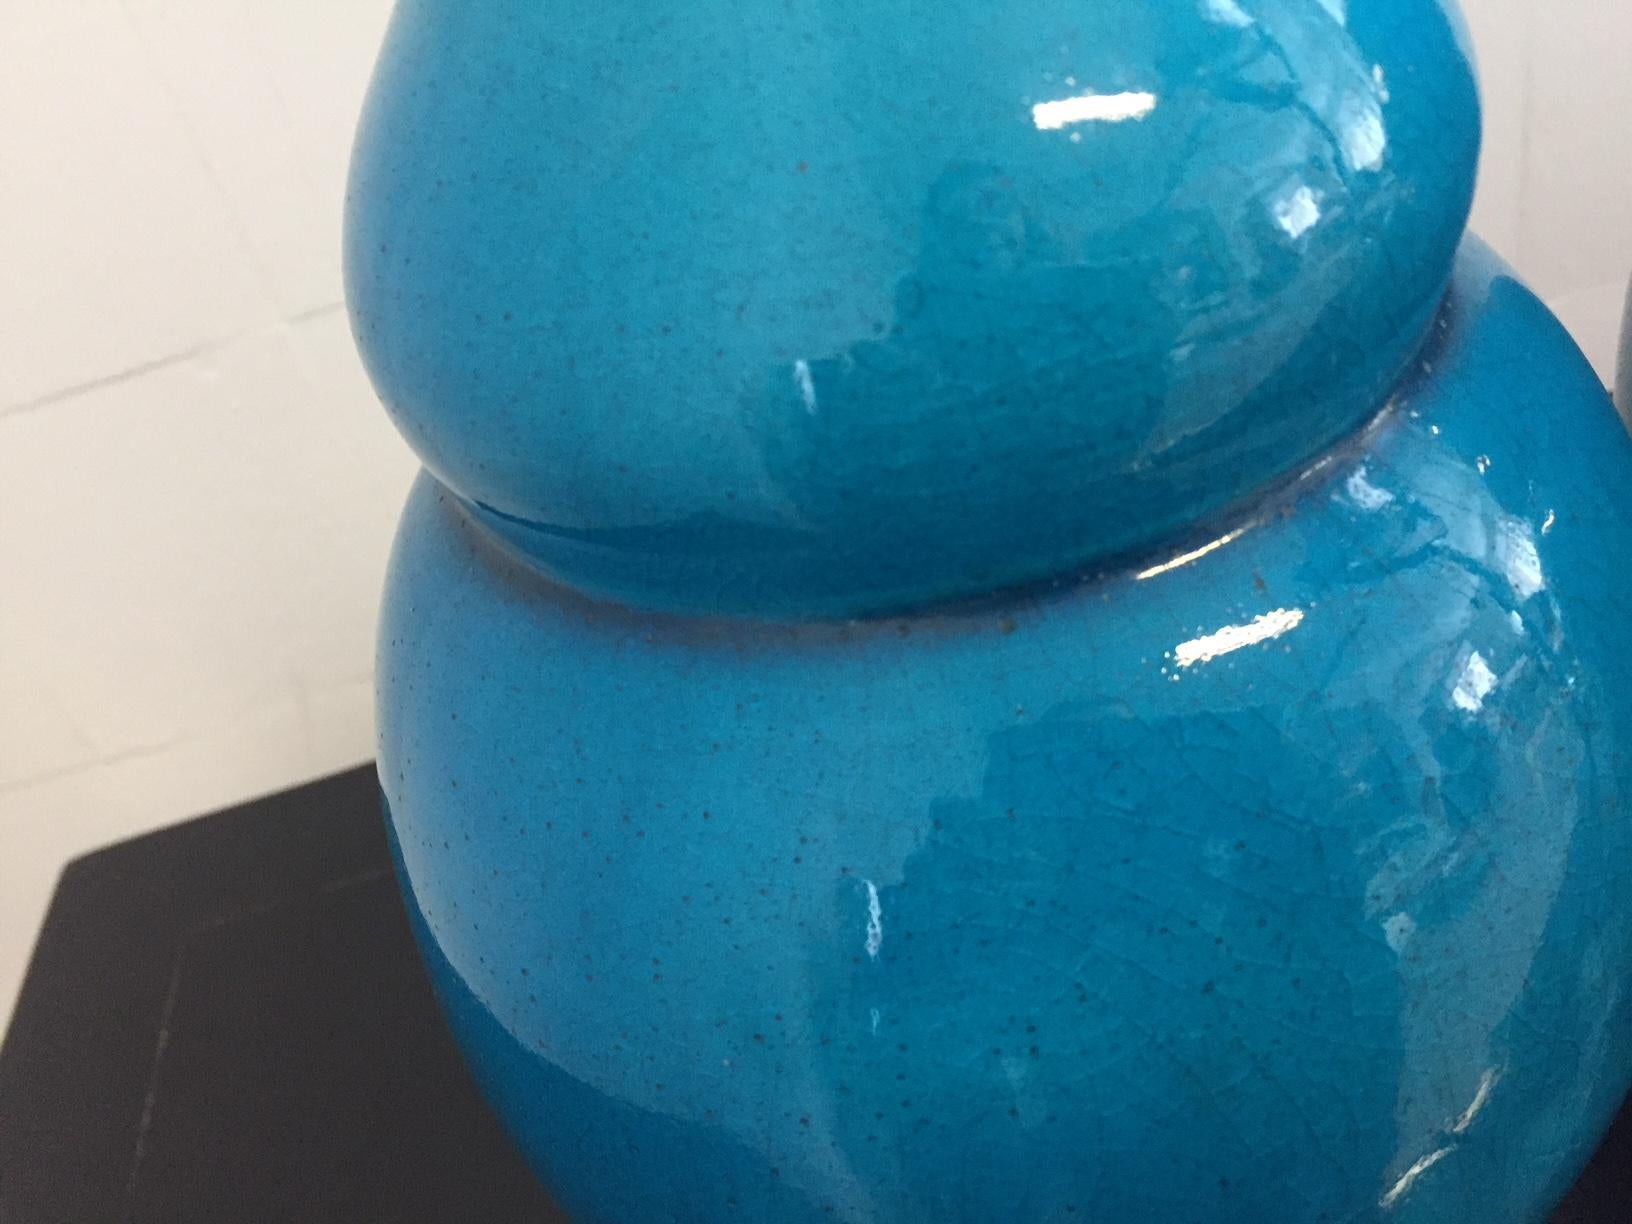 1 pair of vases from Vallauris France, color turquoise, VF is on the bottom and a stamp FRANCE in the bottom, size: 30cm height x 20cm diameter,
The glaze is uneven at the bottom - see image,
No crack.